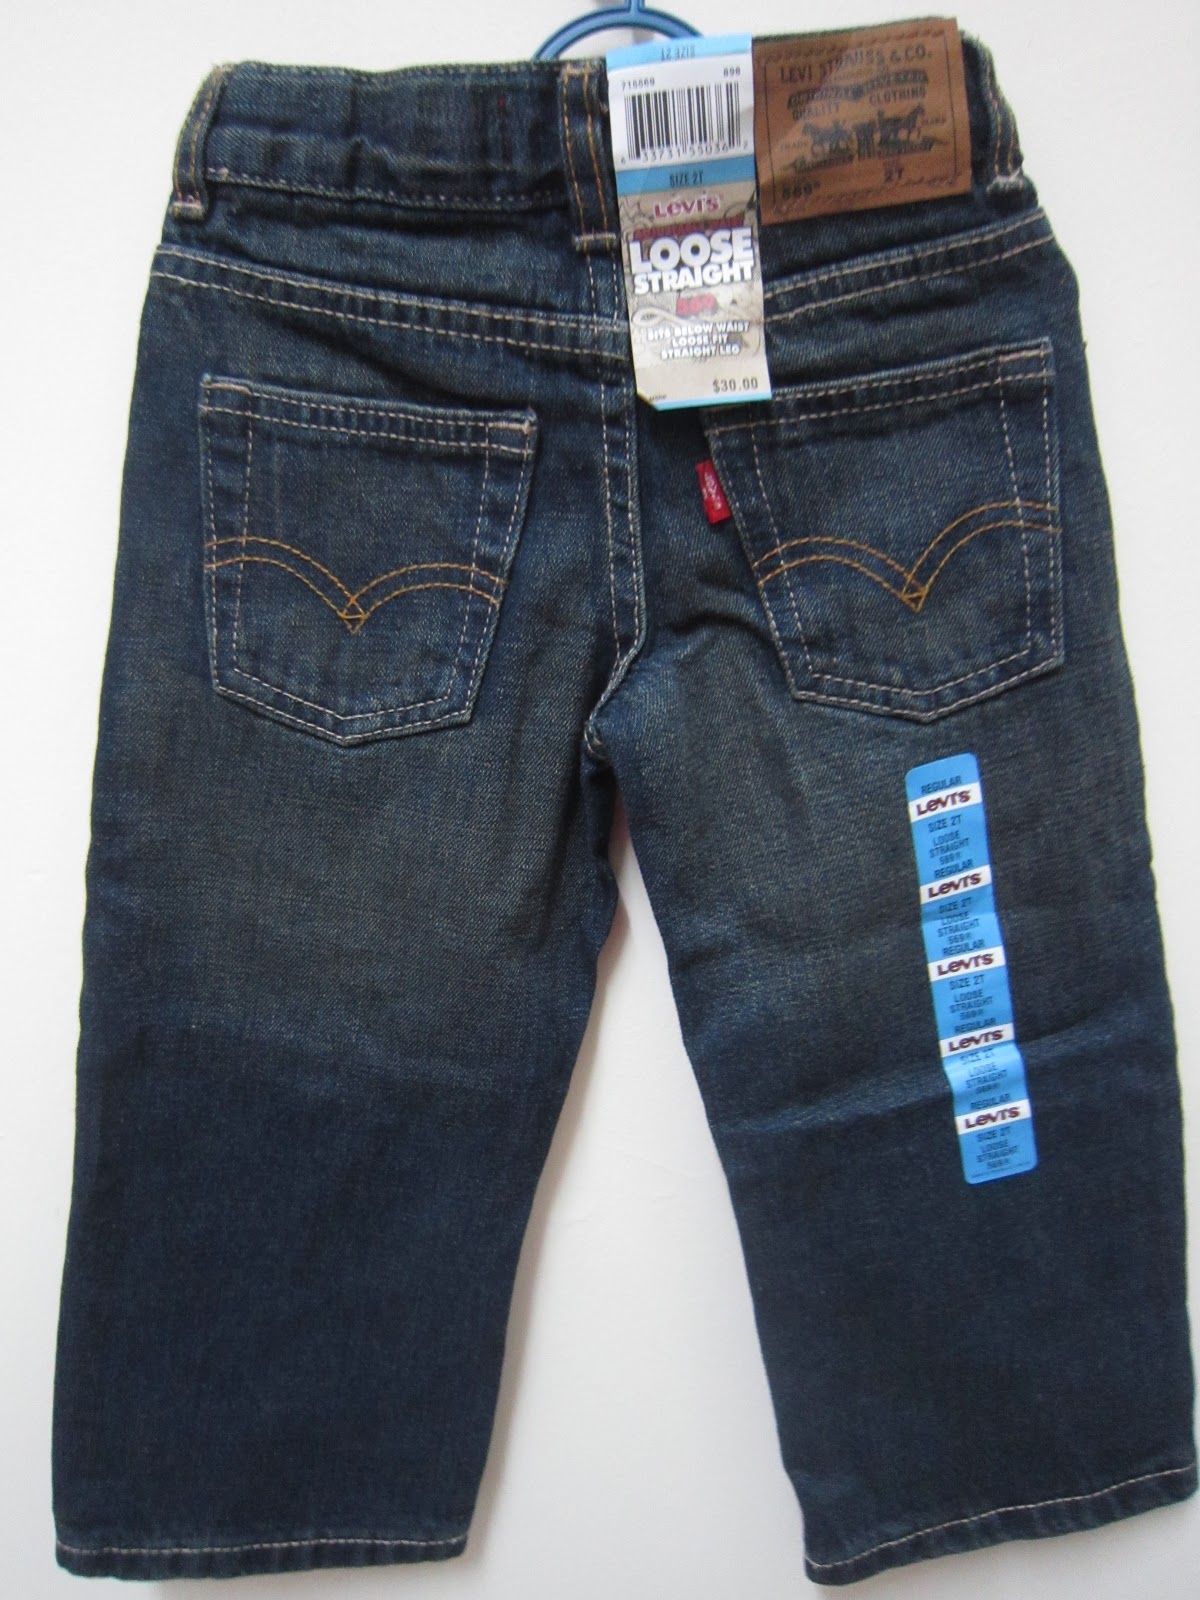 Balqis&#39; Apparel: LEVI&#39;s Jeans SALE... STOCK CLEARANCE!!